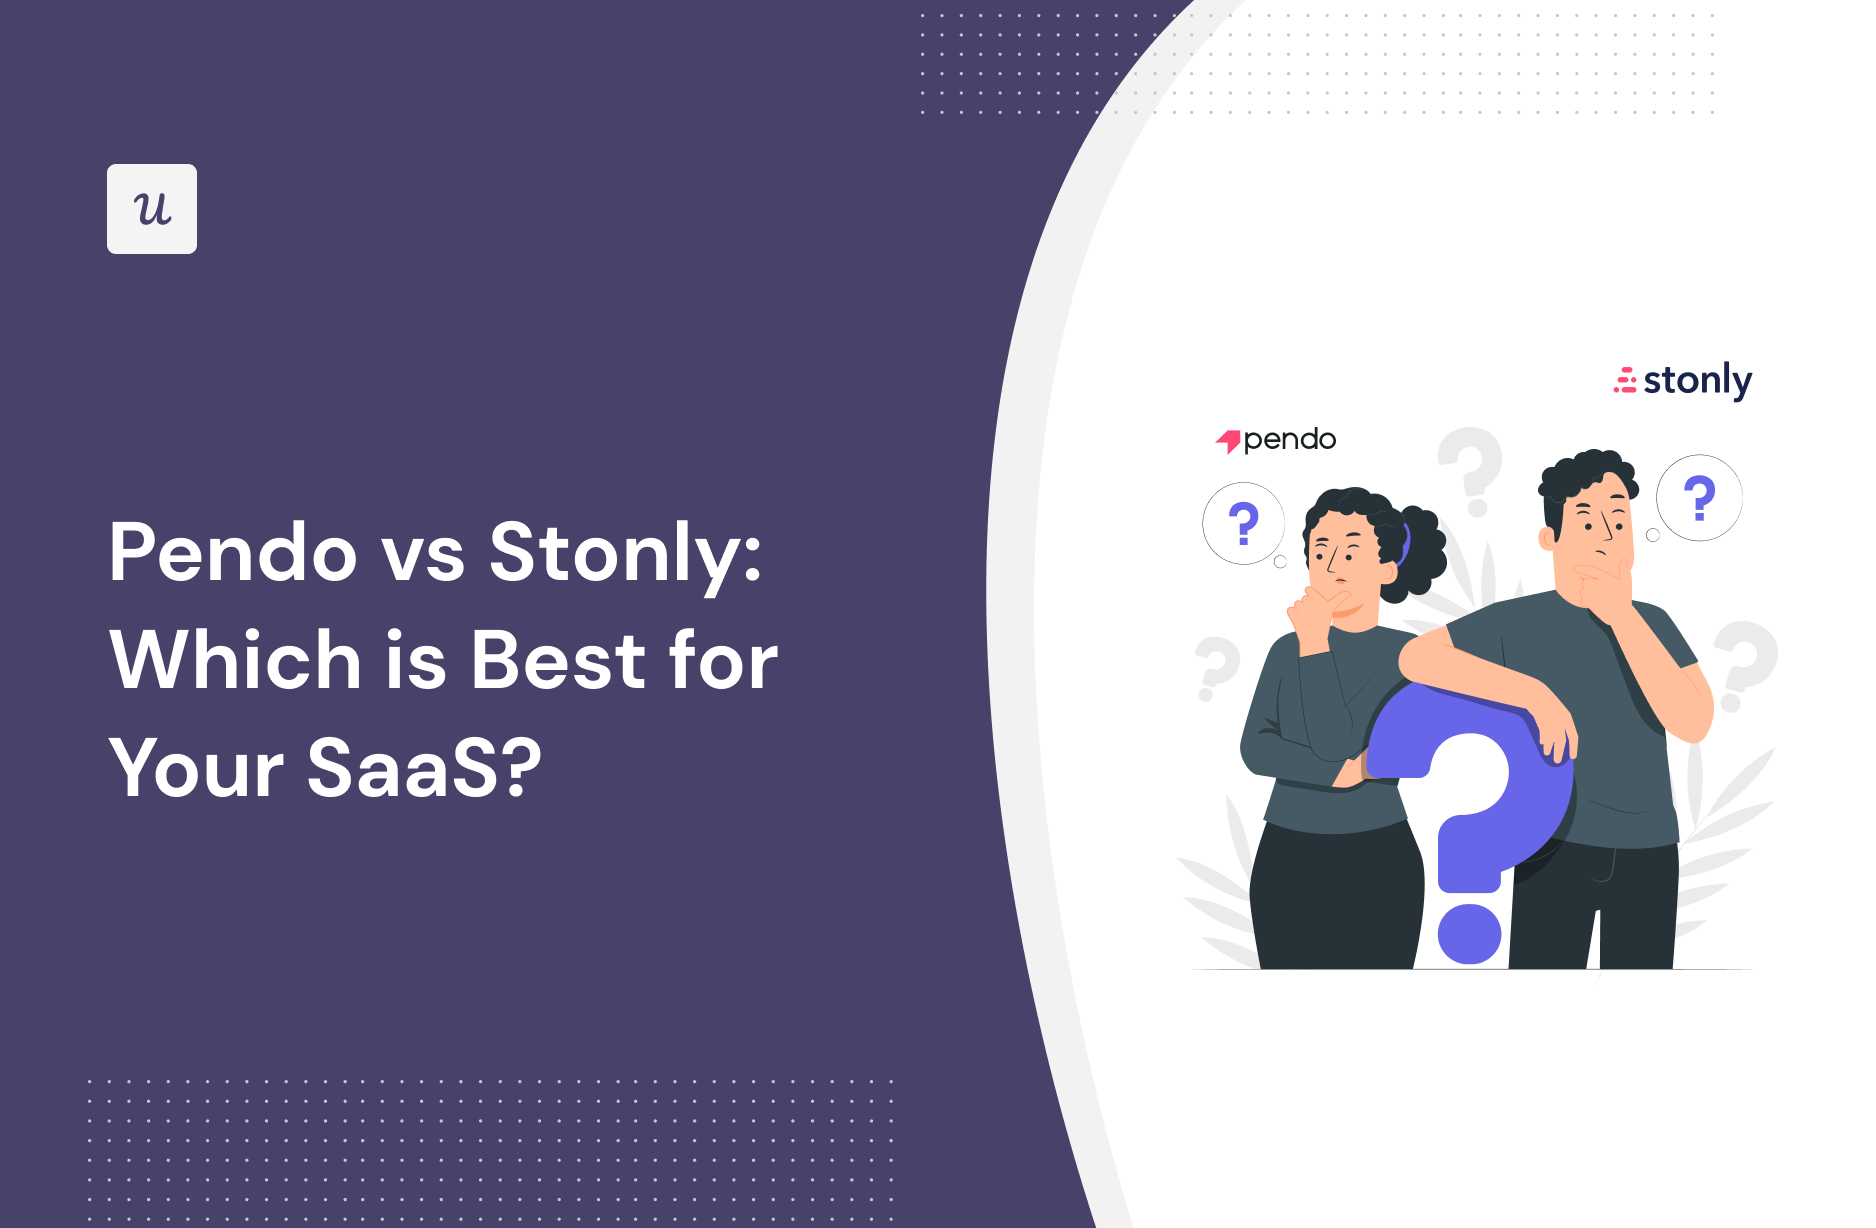 Pendo vs Stonly: Which is Best for Your SaaS?